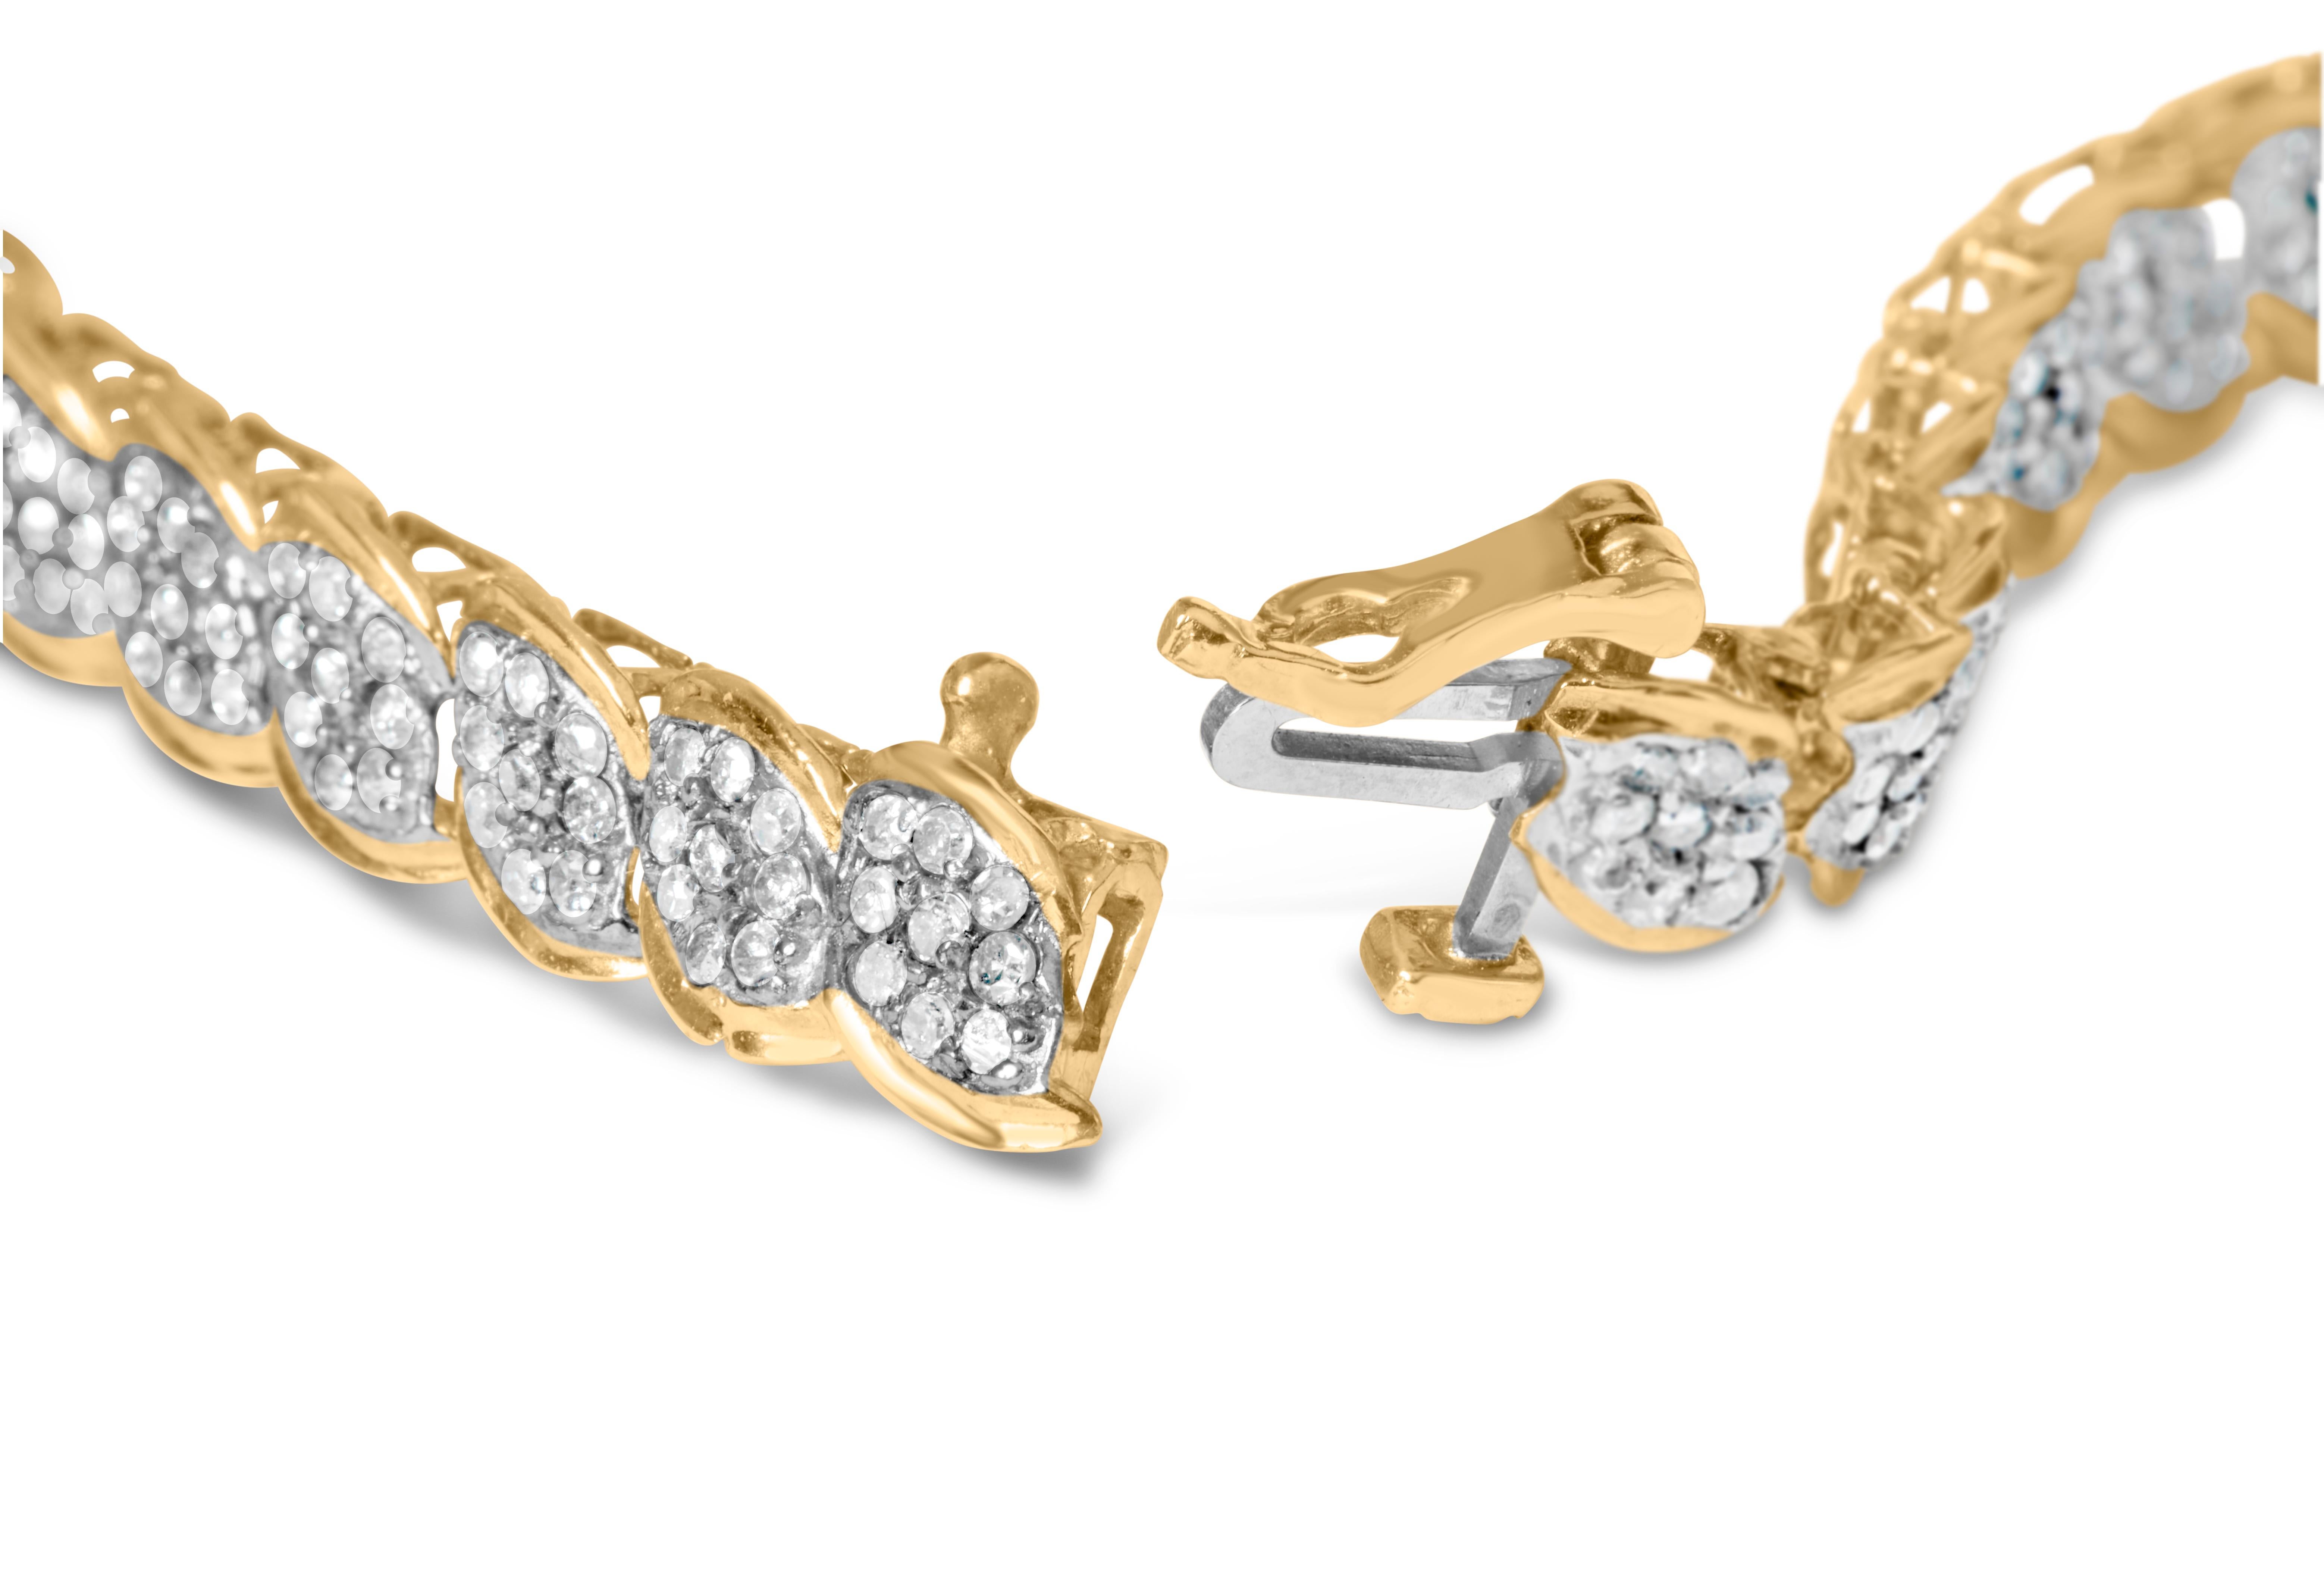 Indulge in the epitome of elegance with our exquisite 10K Yellow Gold Bracelet. Crafted to perfection, this captivating piece features a dazzling array of 306 natural round-cut diamonds, totaling an impressive 2.00 cttw. The diamond's J-K color adds